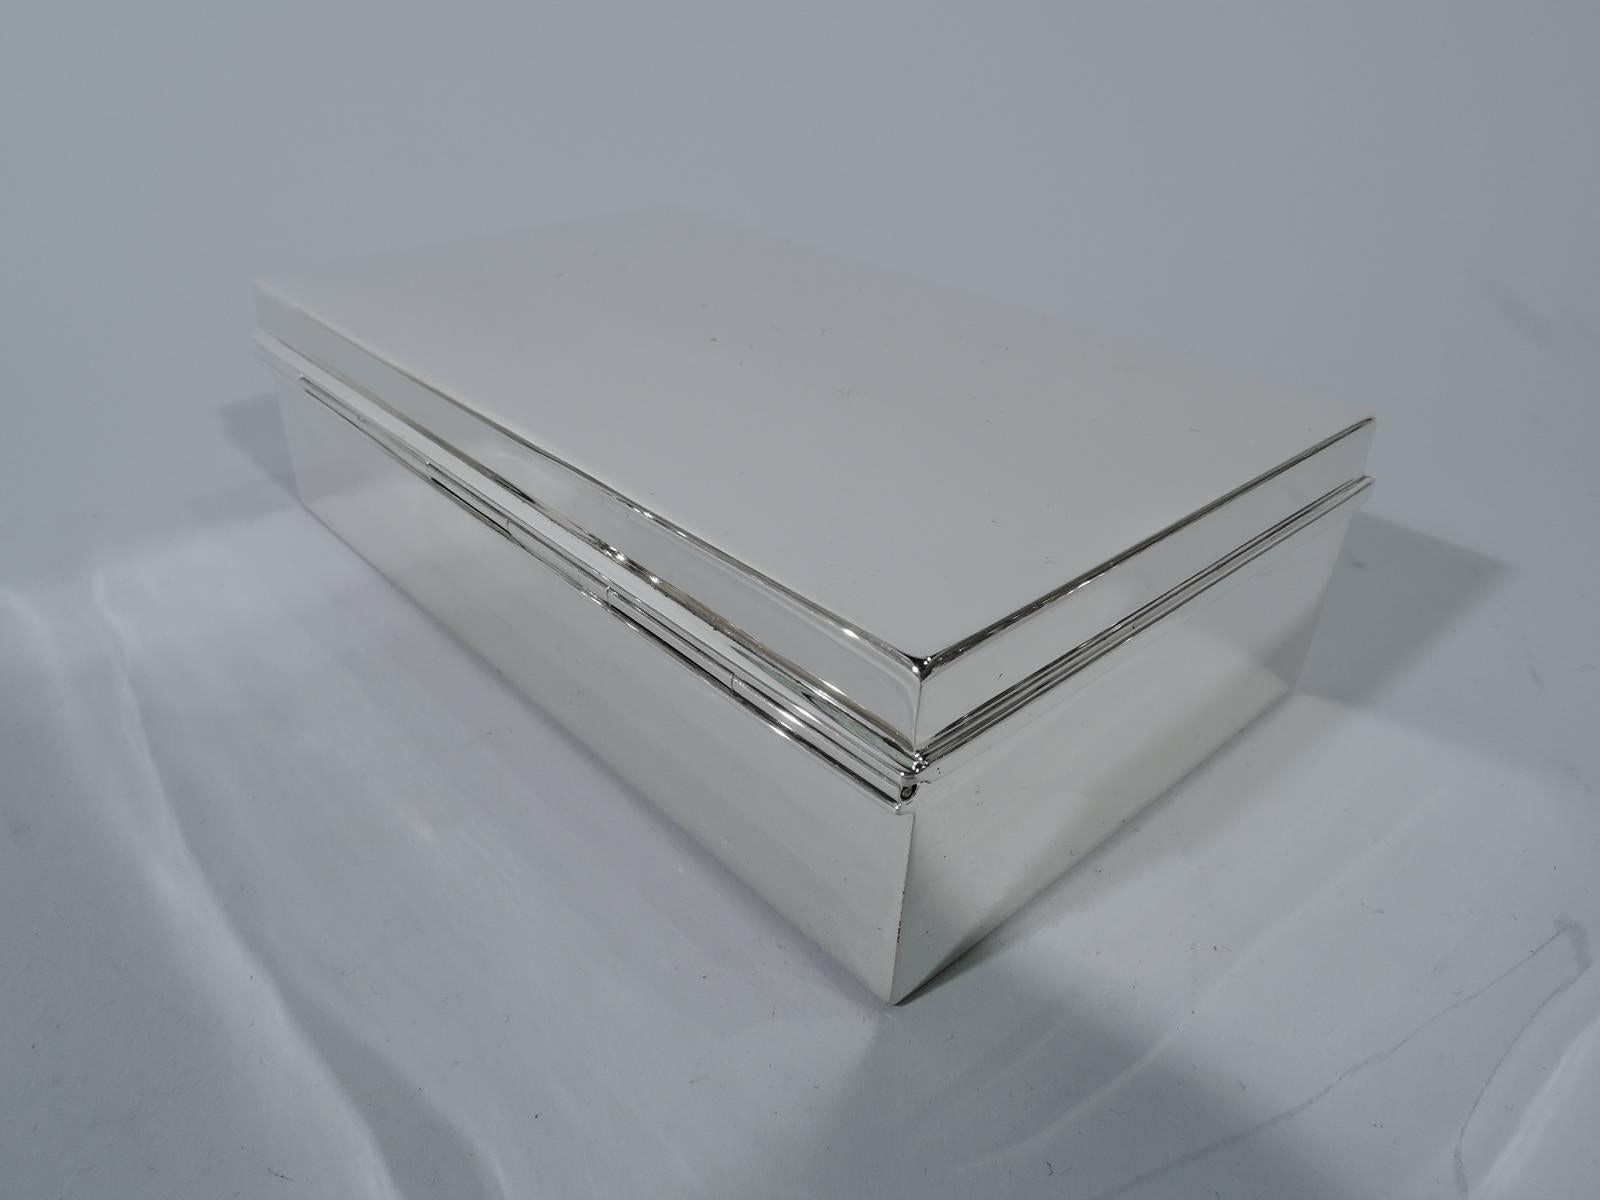 Smart and Modern sterling silver desk box. Made by Tiffany & Co. in New York. Rectangular with straight sides. Cover is hinged and has molded rim. Box interior cedar lined. Cover interior lightly gilt. Hallmark includes pattern no. 22354 and